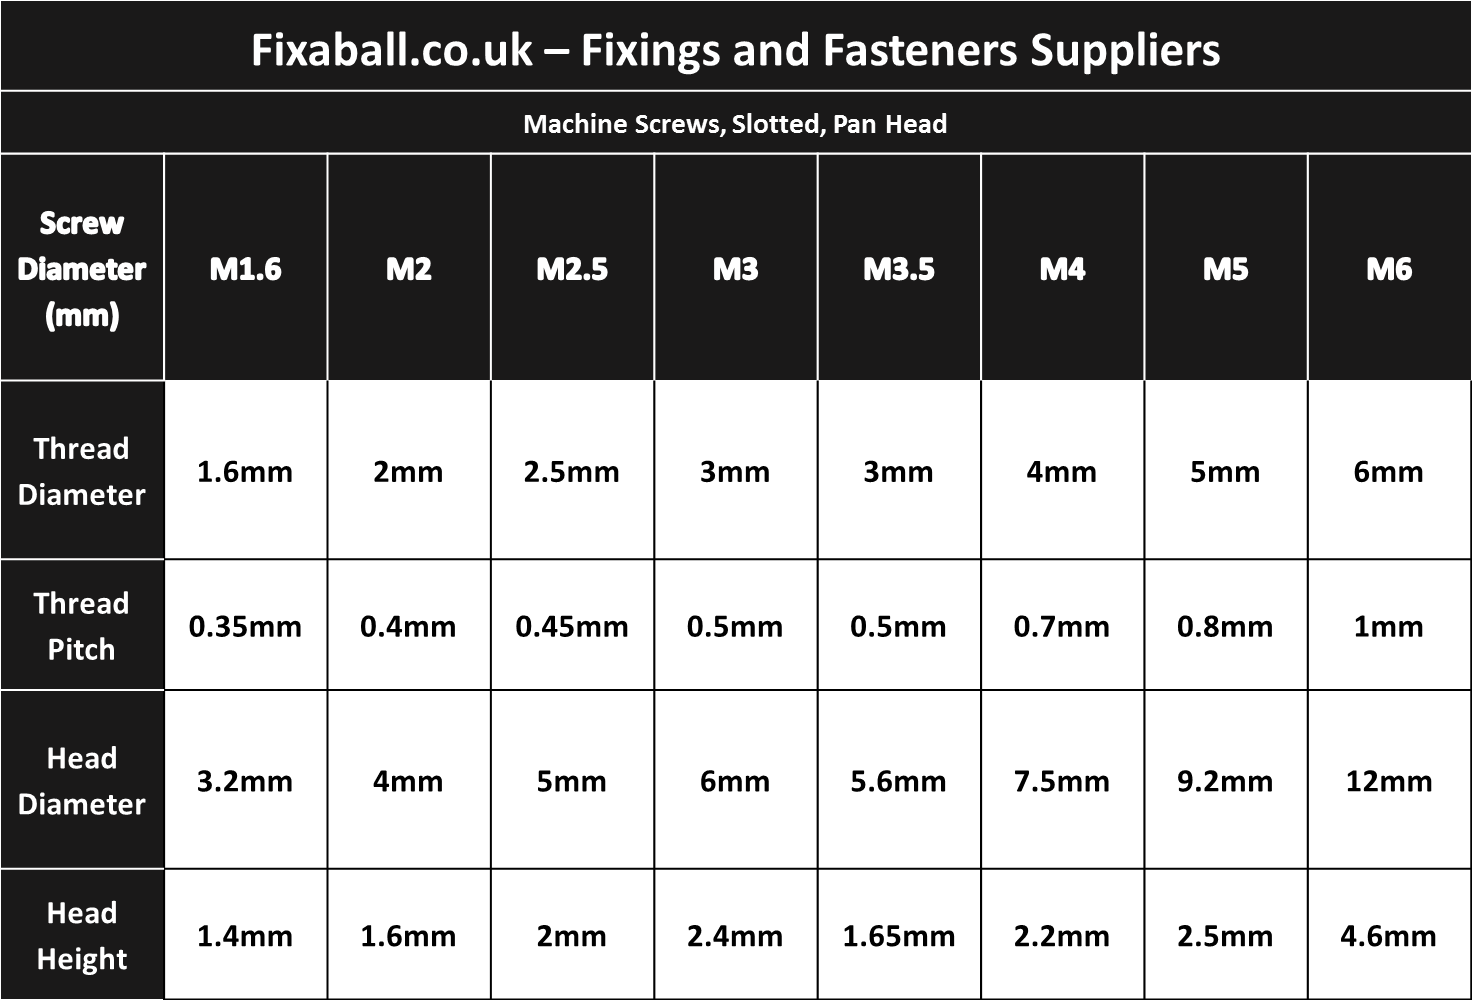 M2 and M2.5 Machine Screws Slotted Pan Head Brass DIN 85 - Fixaball Ltd. Fixings and Fasteners UK